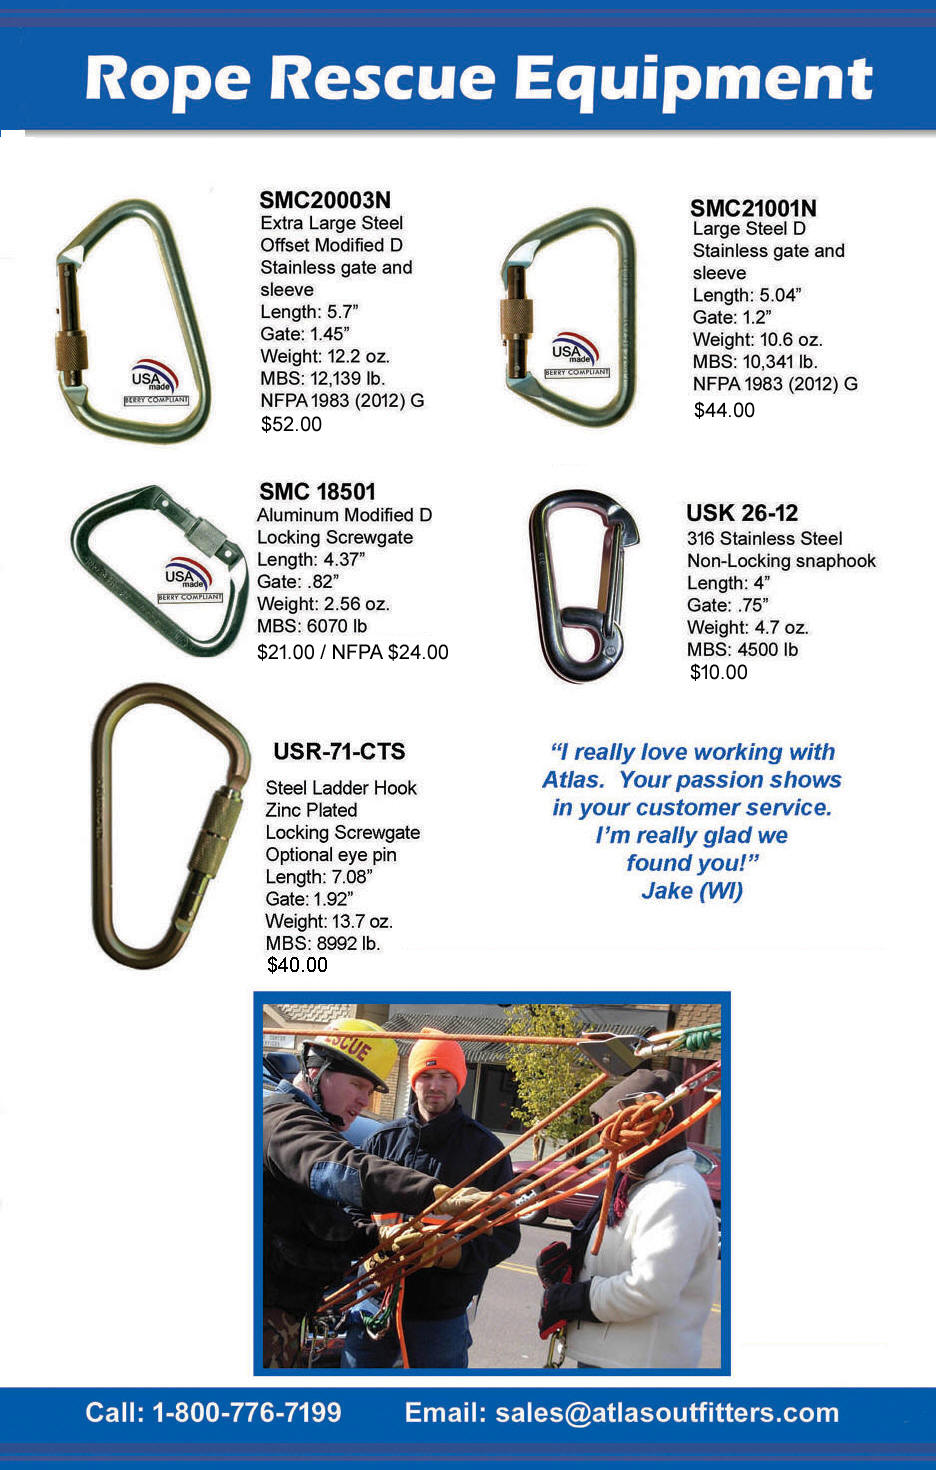 Rope rescue carabiners